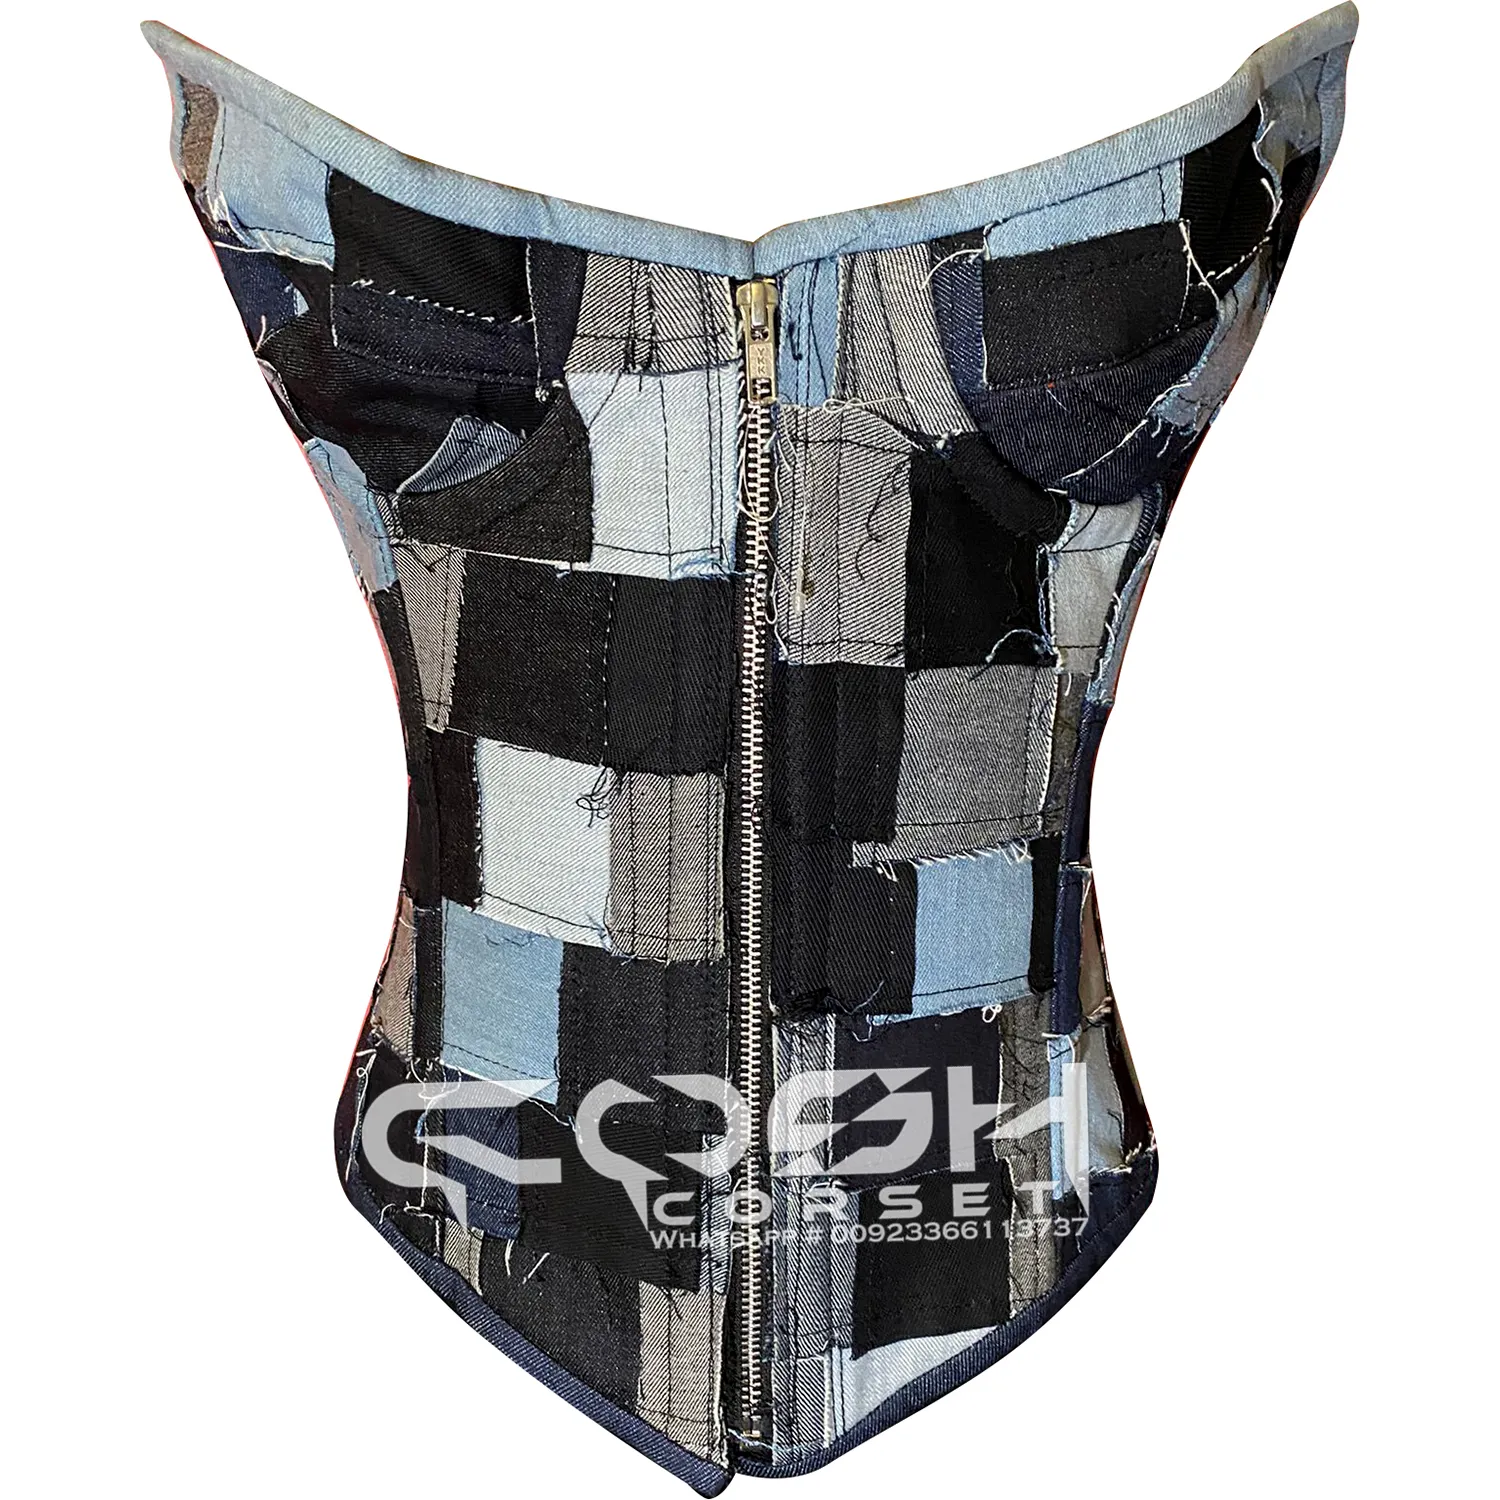 COSH CORSET Overbust Steel boned Taillen training Extrem kurvige Body Shaper Jeans Jeans Patches Work Fashion Outfit Korsett Bustier